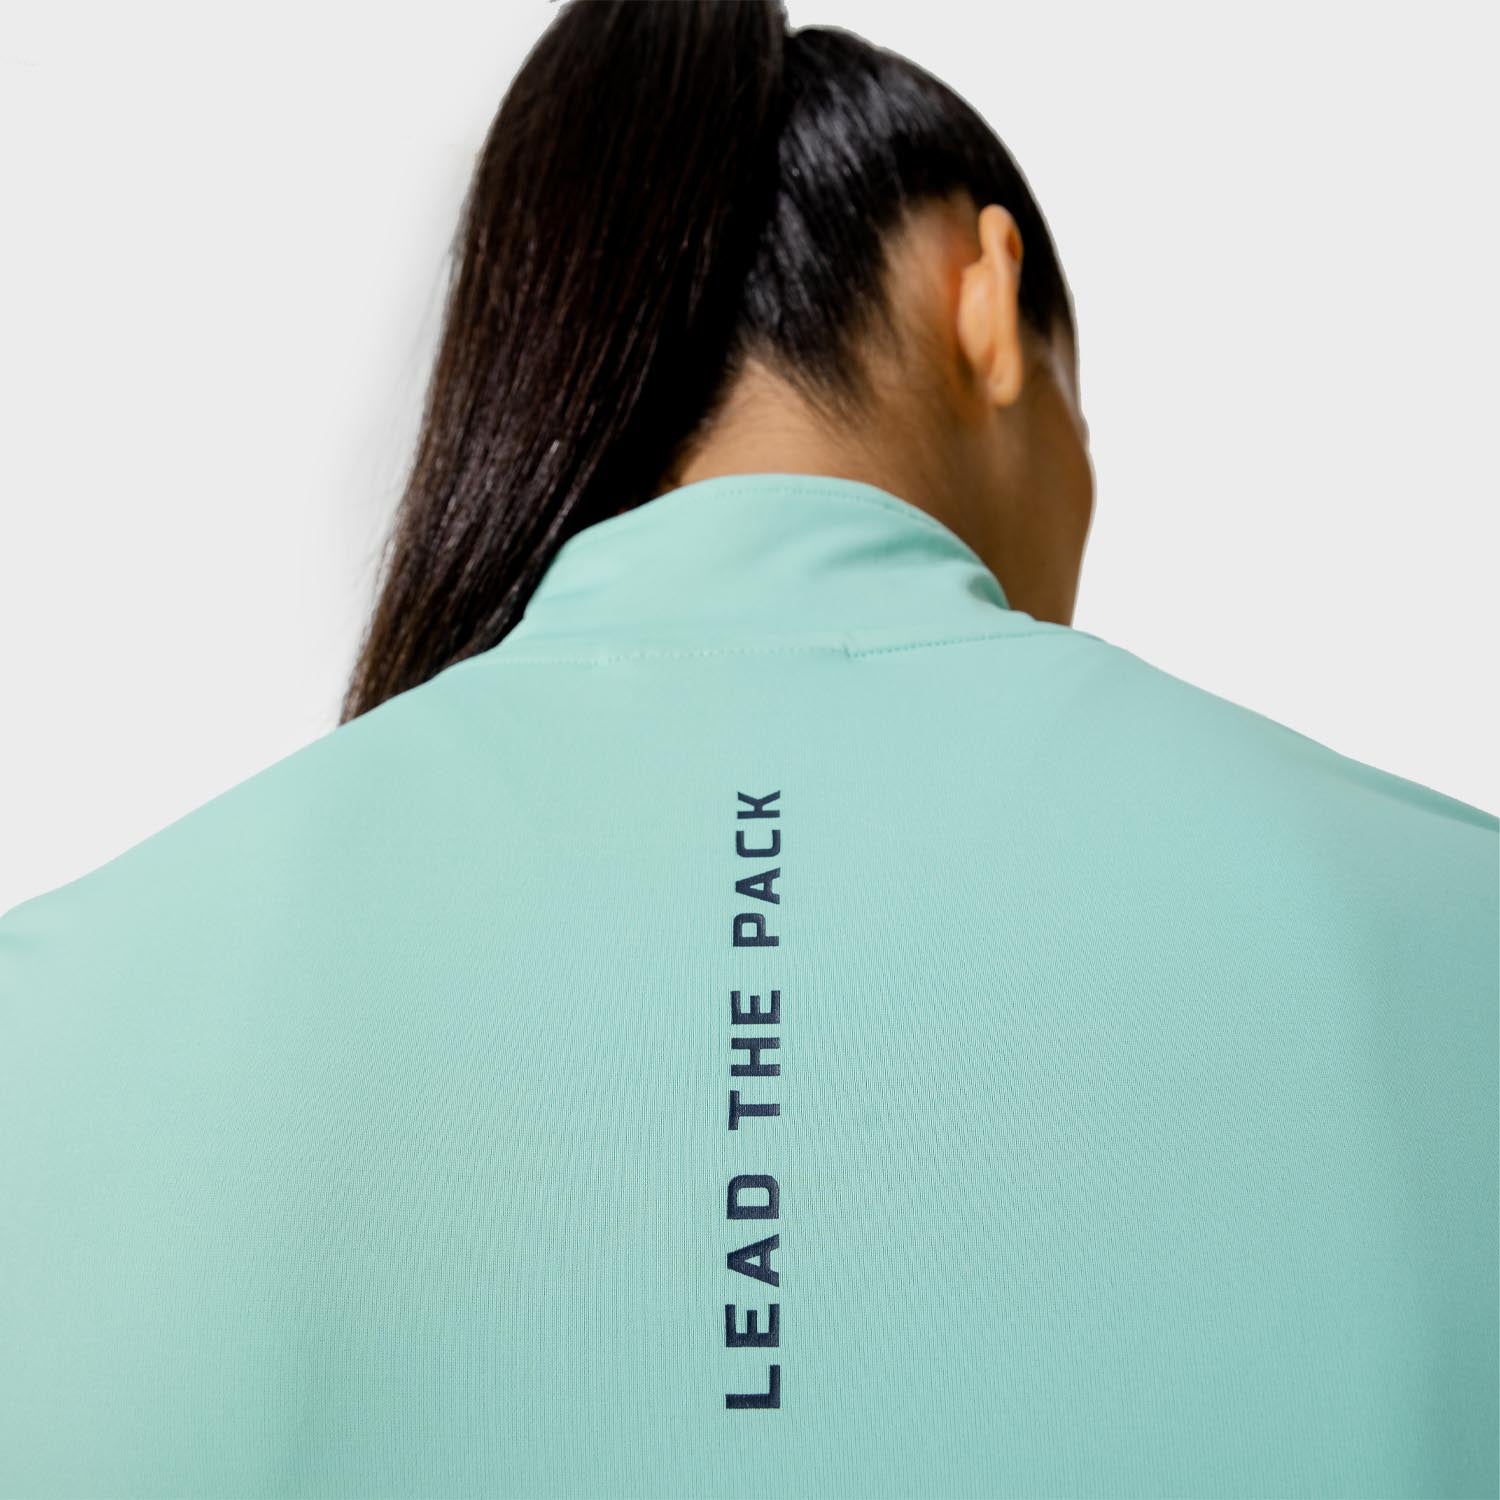 squatwolf-running-running-tops-for-lab-360-top-pastel-turquoise-long-sleeves-gym-wear